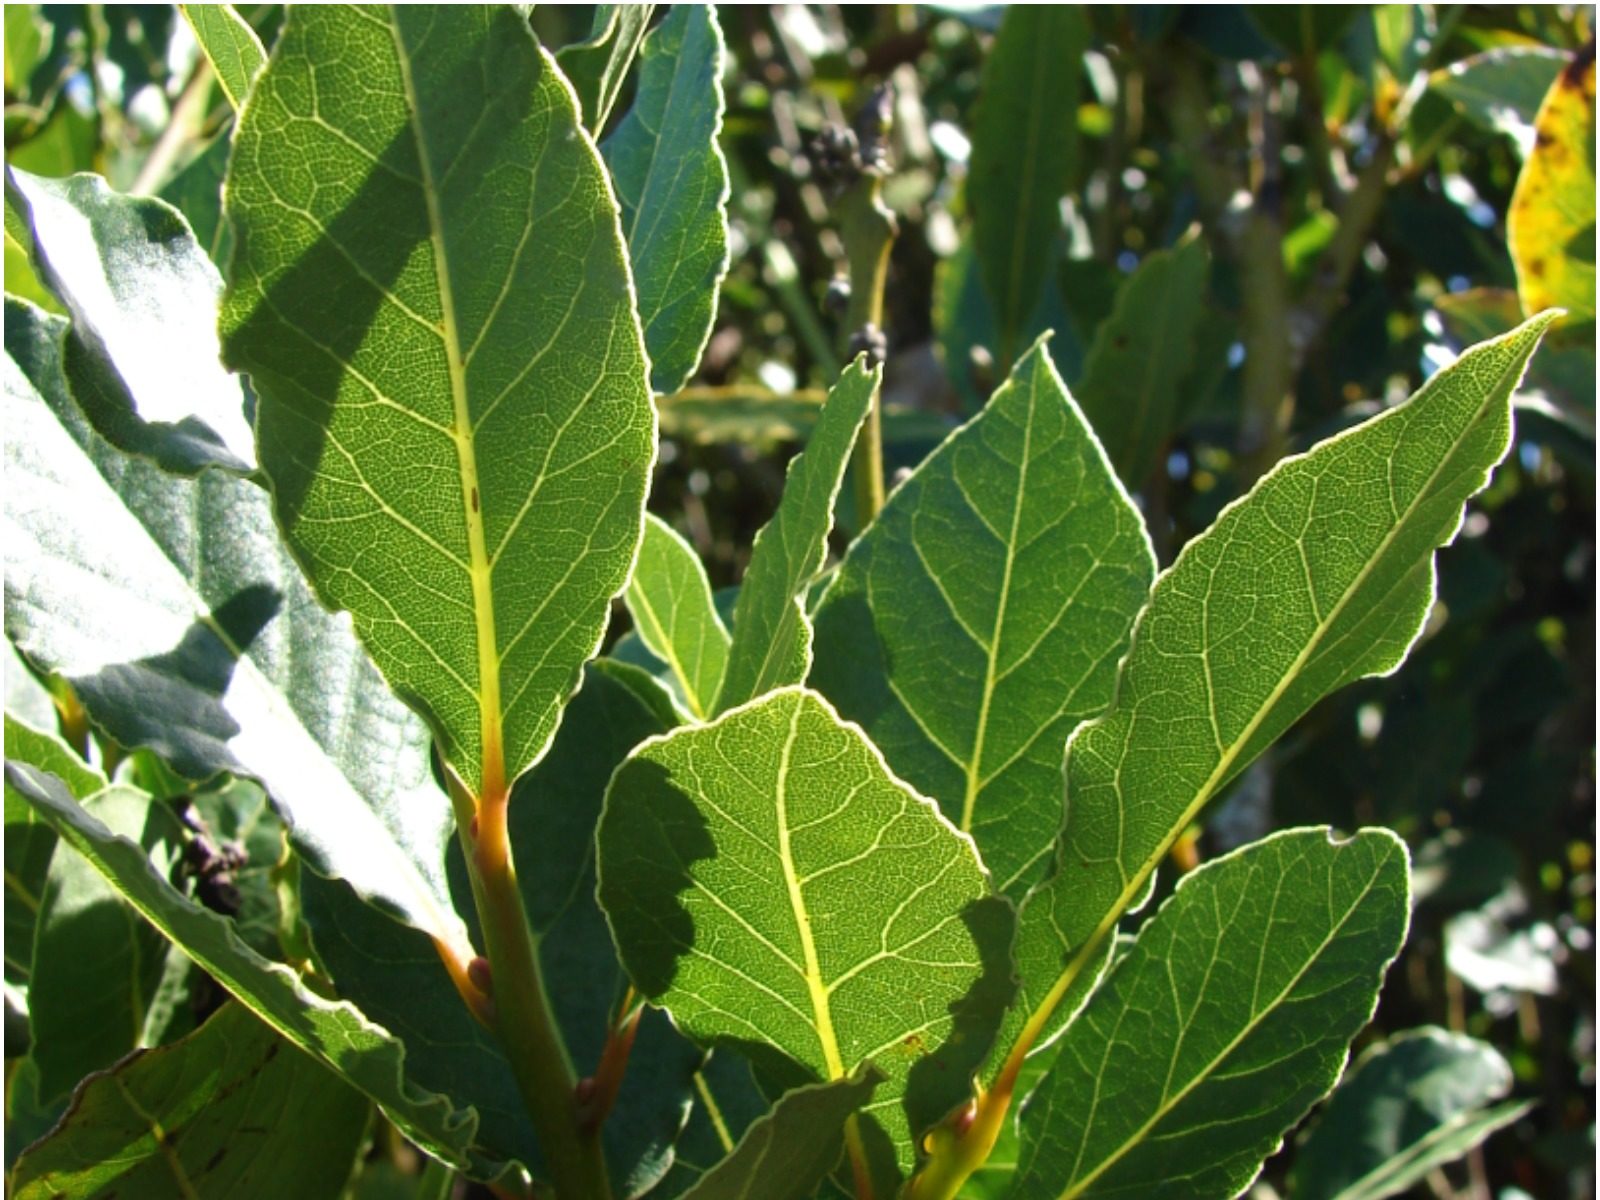 Earning opportunity 50 plants of bay leaf annual income of Rs 1 50 lakh government will help check details achs - Business Idea: इस पत्‍ते के सिर्फ 50 पौधों से होती है